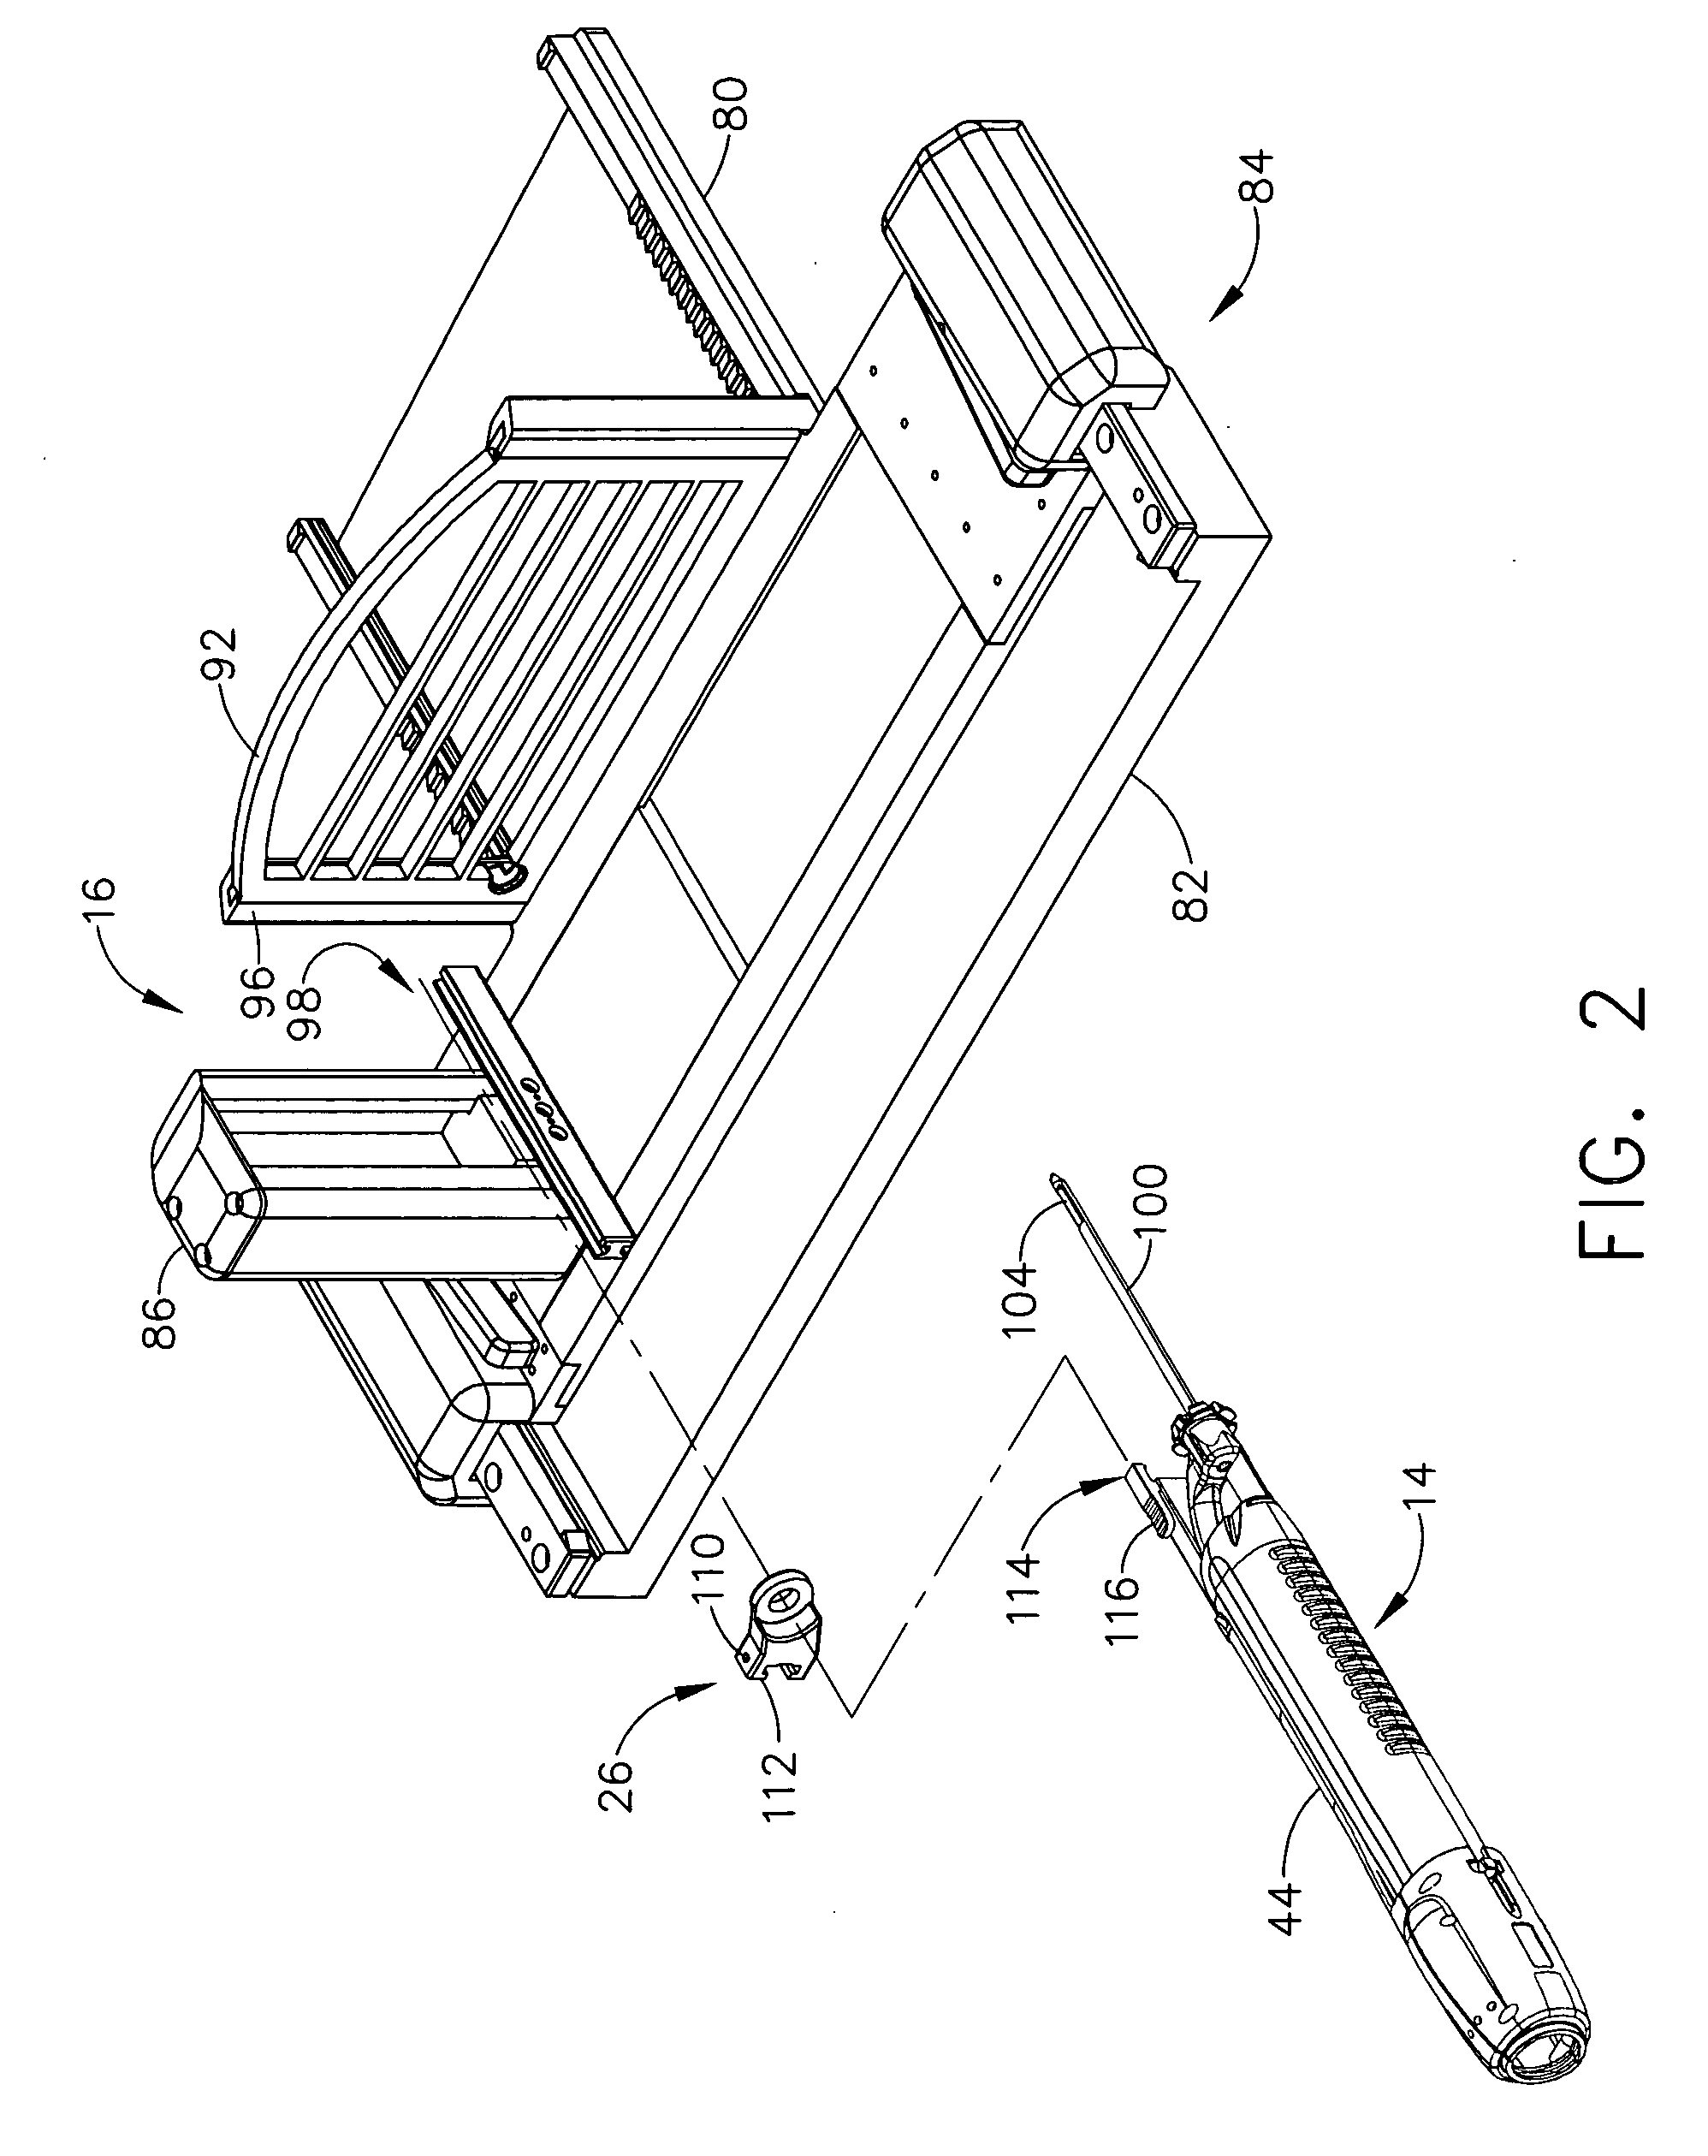 MRI biopsy apparatus incorporating an imageable penetrating portion